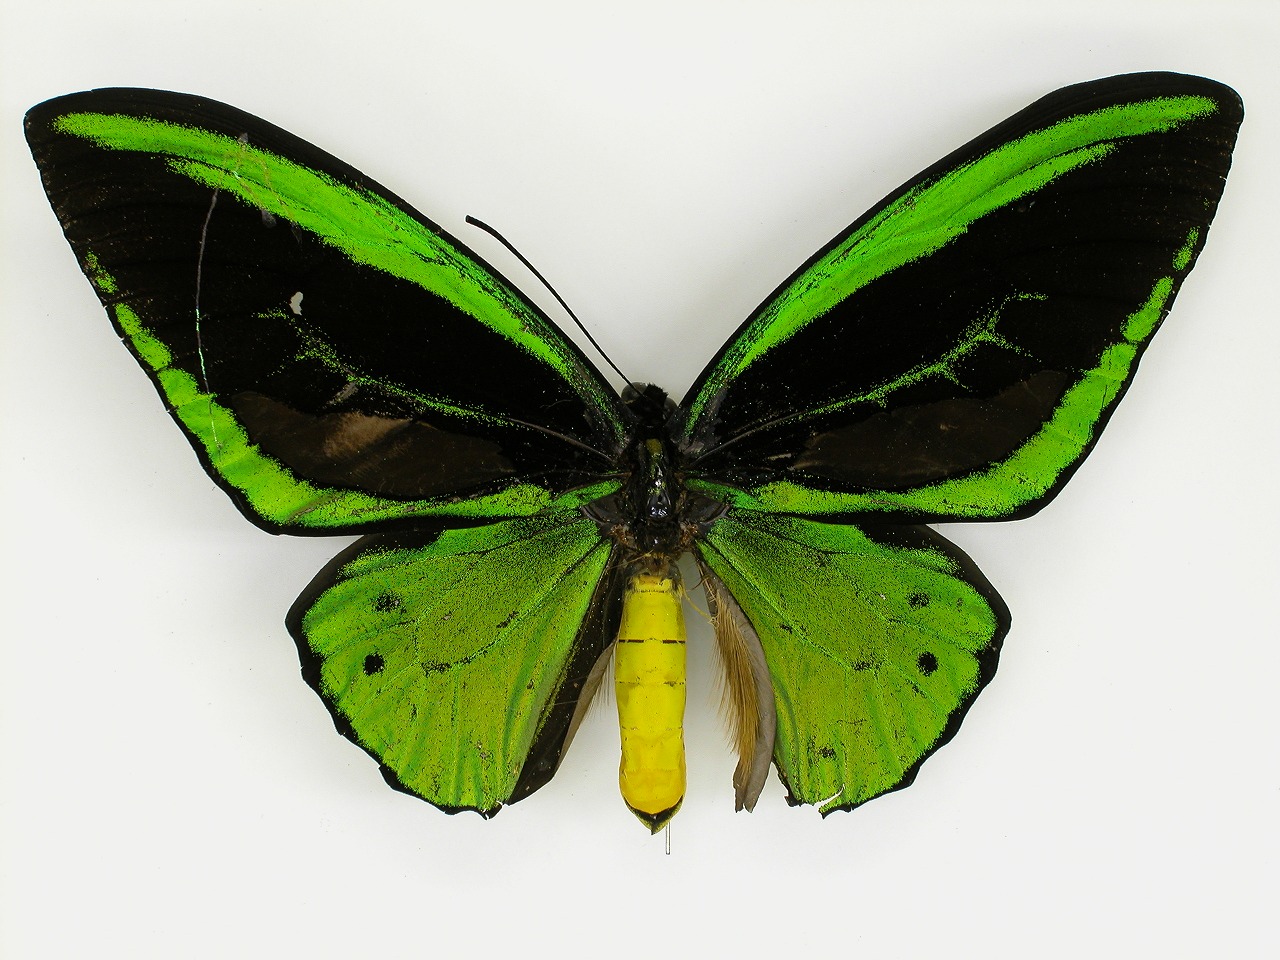 https://www.hitohaku.jp/material/l-material/butterfly-wing/1-papilionidae/B1-269985_A.jpg